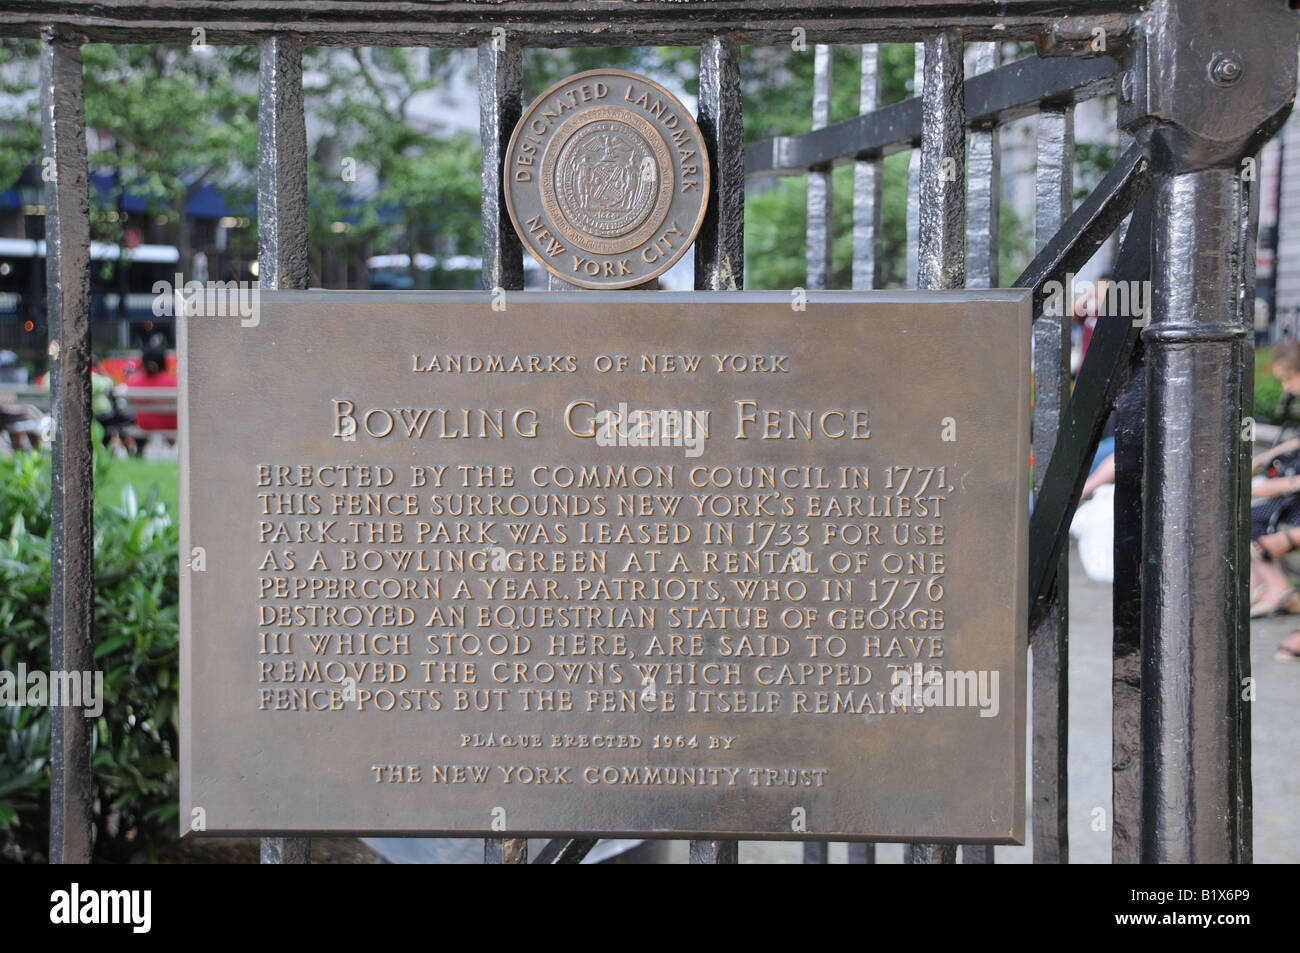 The plaque on Bowling Green park in Lower Manhattan states that this is New York's oldest park. Stock Photo